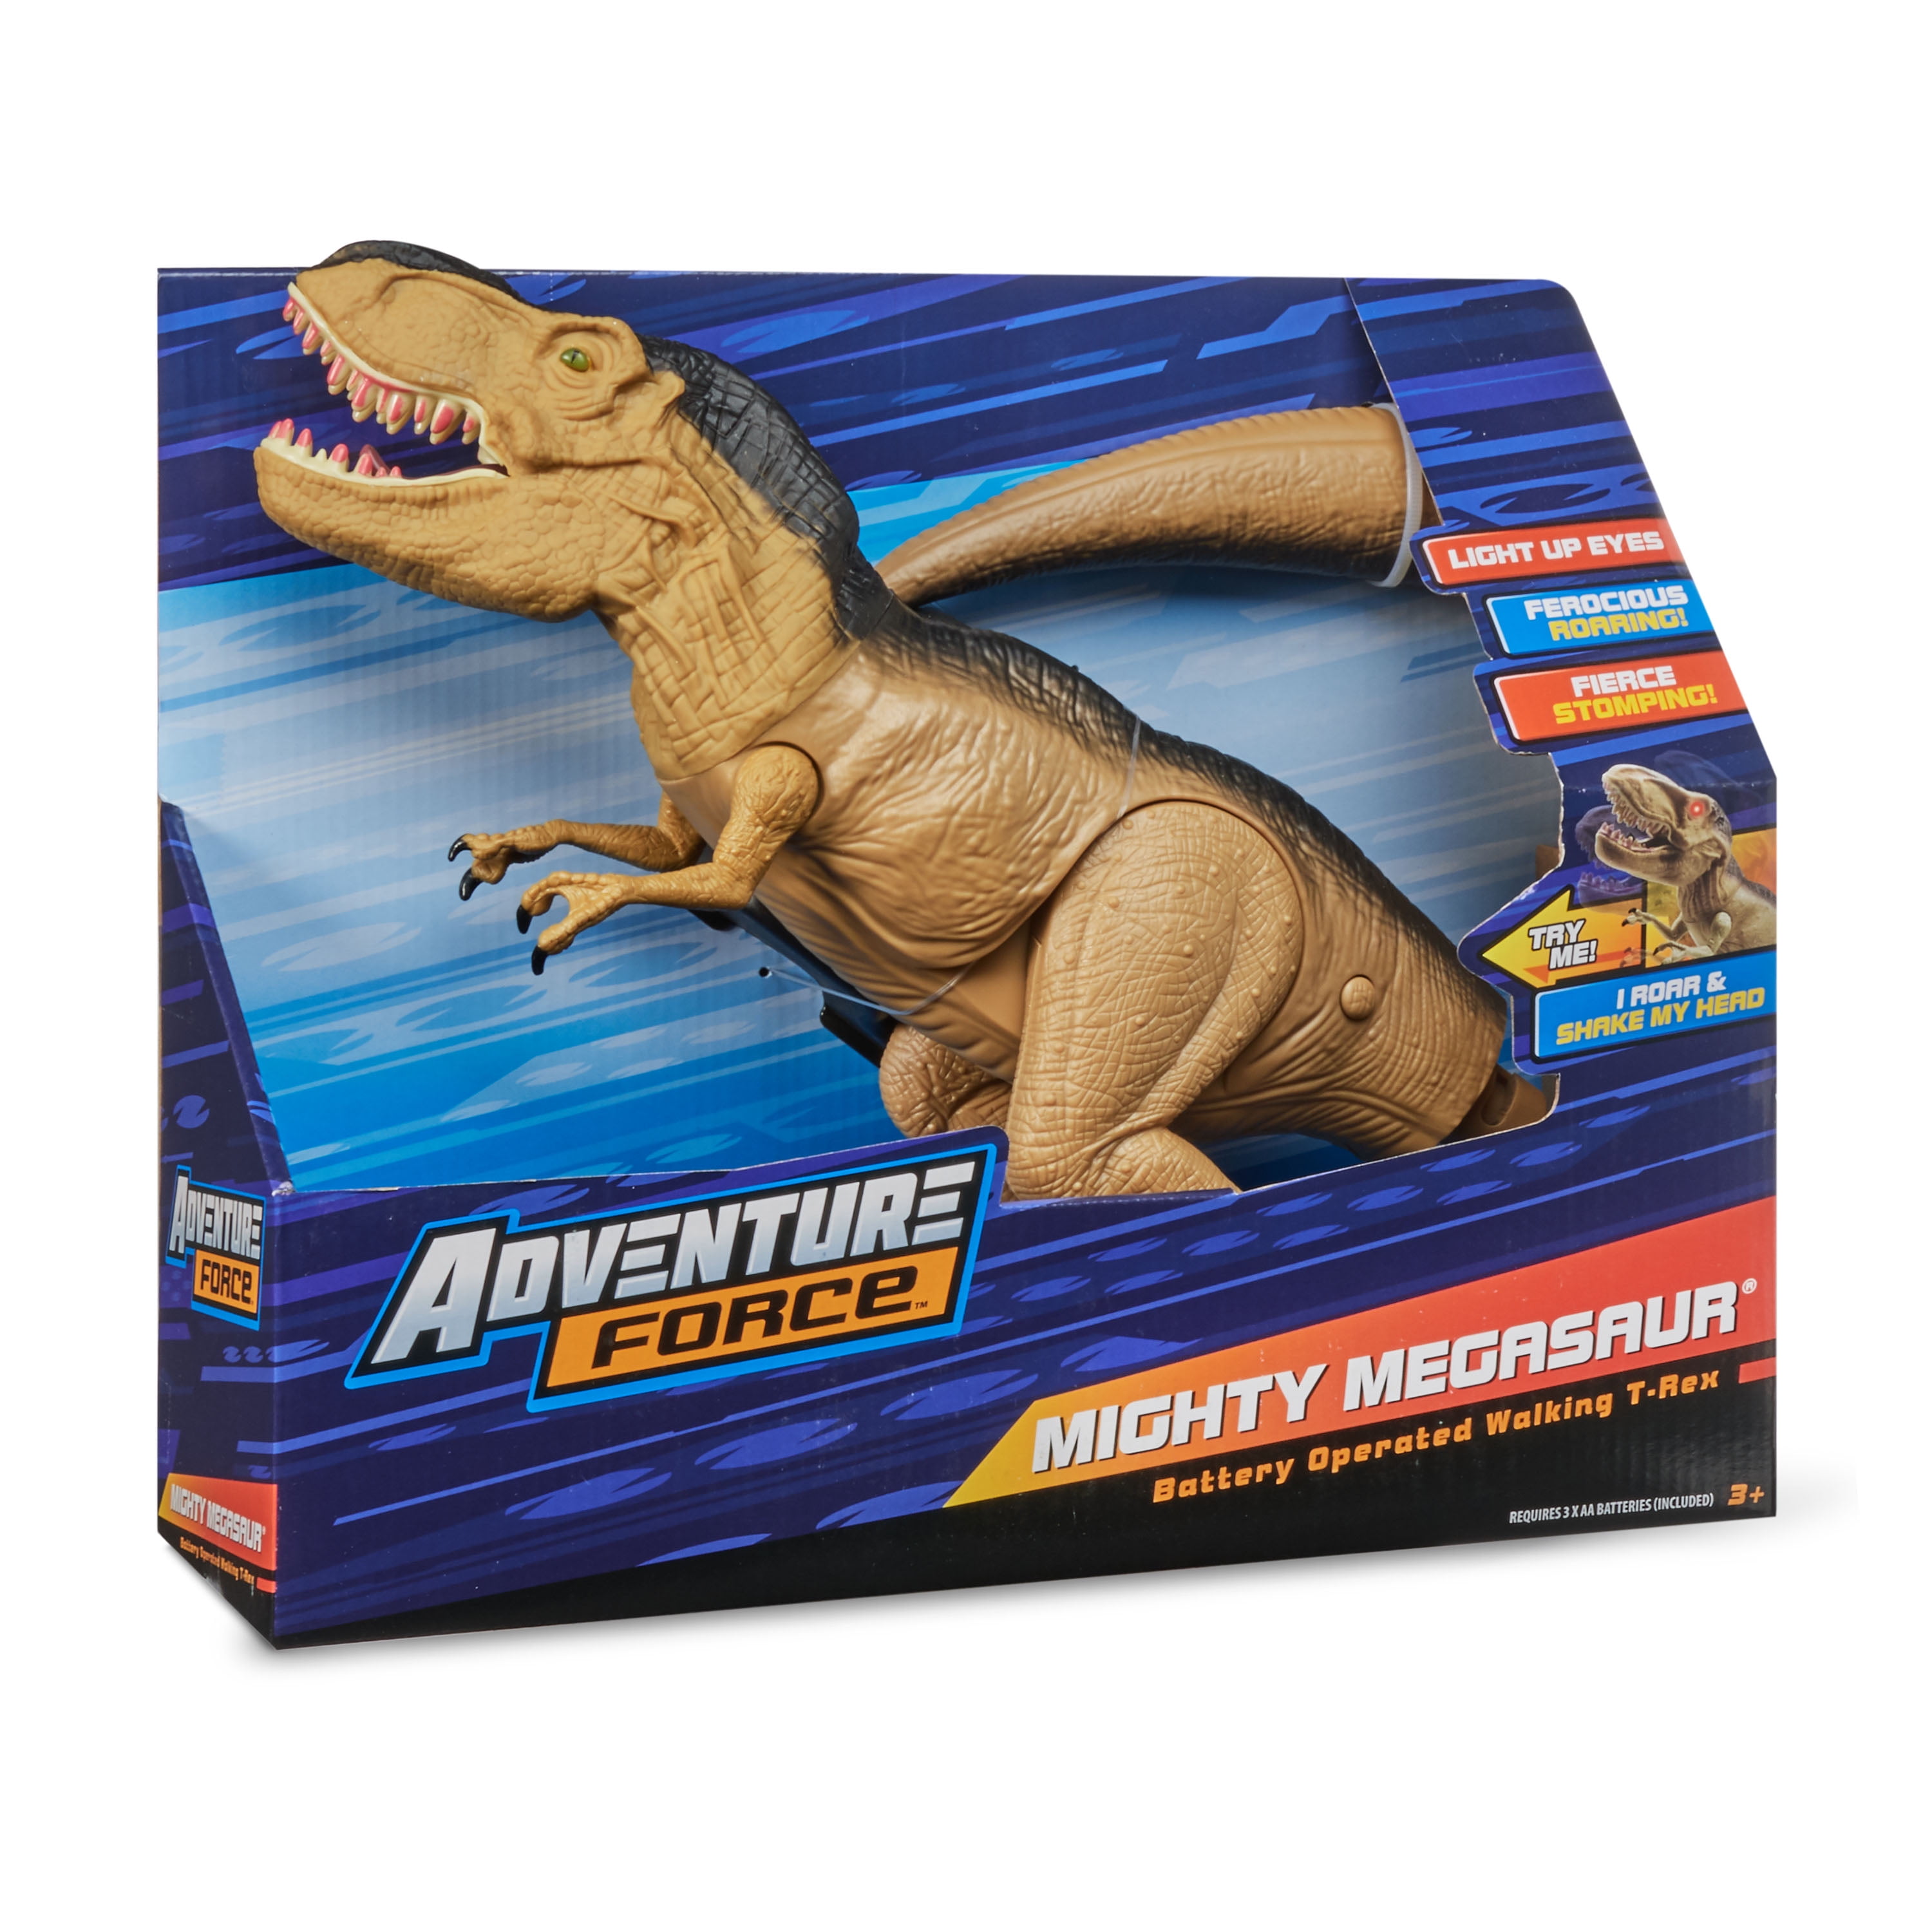 Mighty Megasaur large RUGOPS Toy Battery Operated Walking Dinosaur NEW not T-REX 